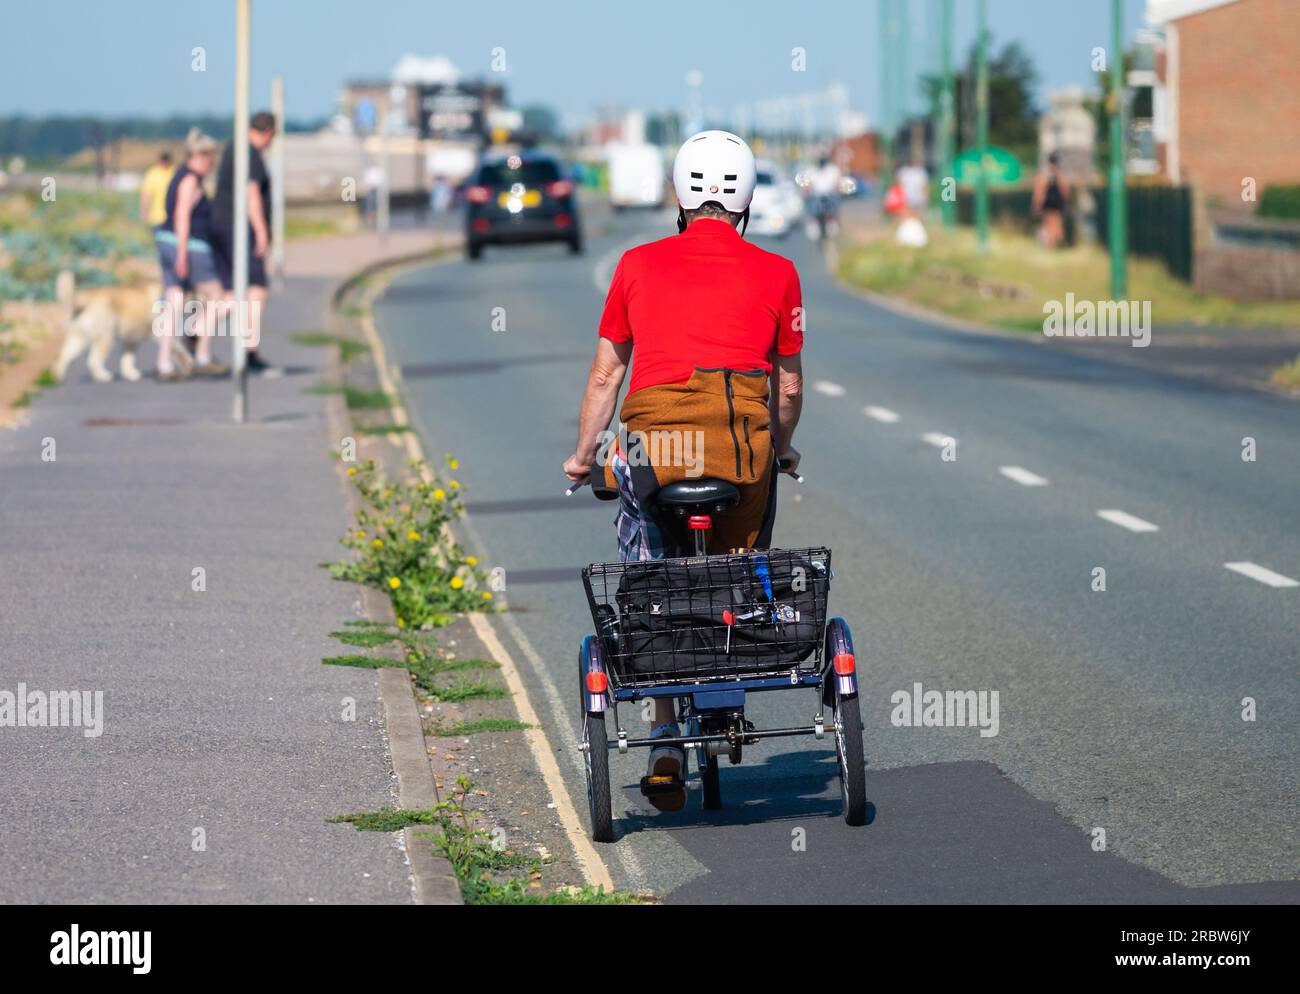 Man riding tricycle, a pushbike with 3 wheels, with a shopping basket, wearing a helmet on a seafront road in Summer, UK. Stock Photo